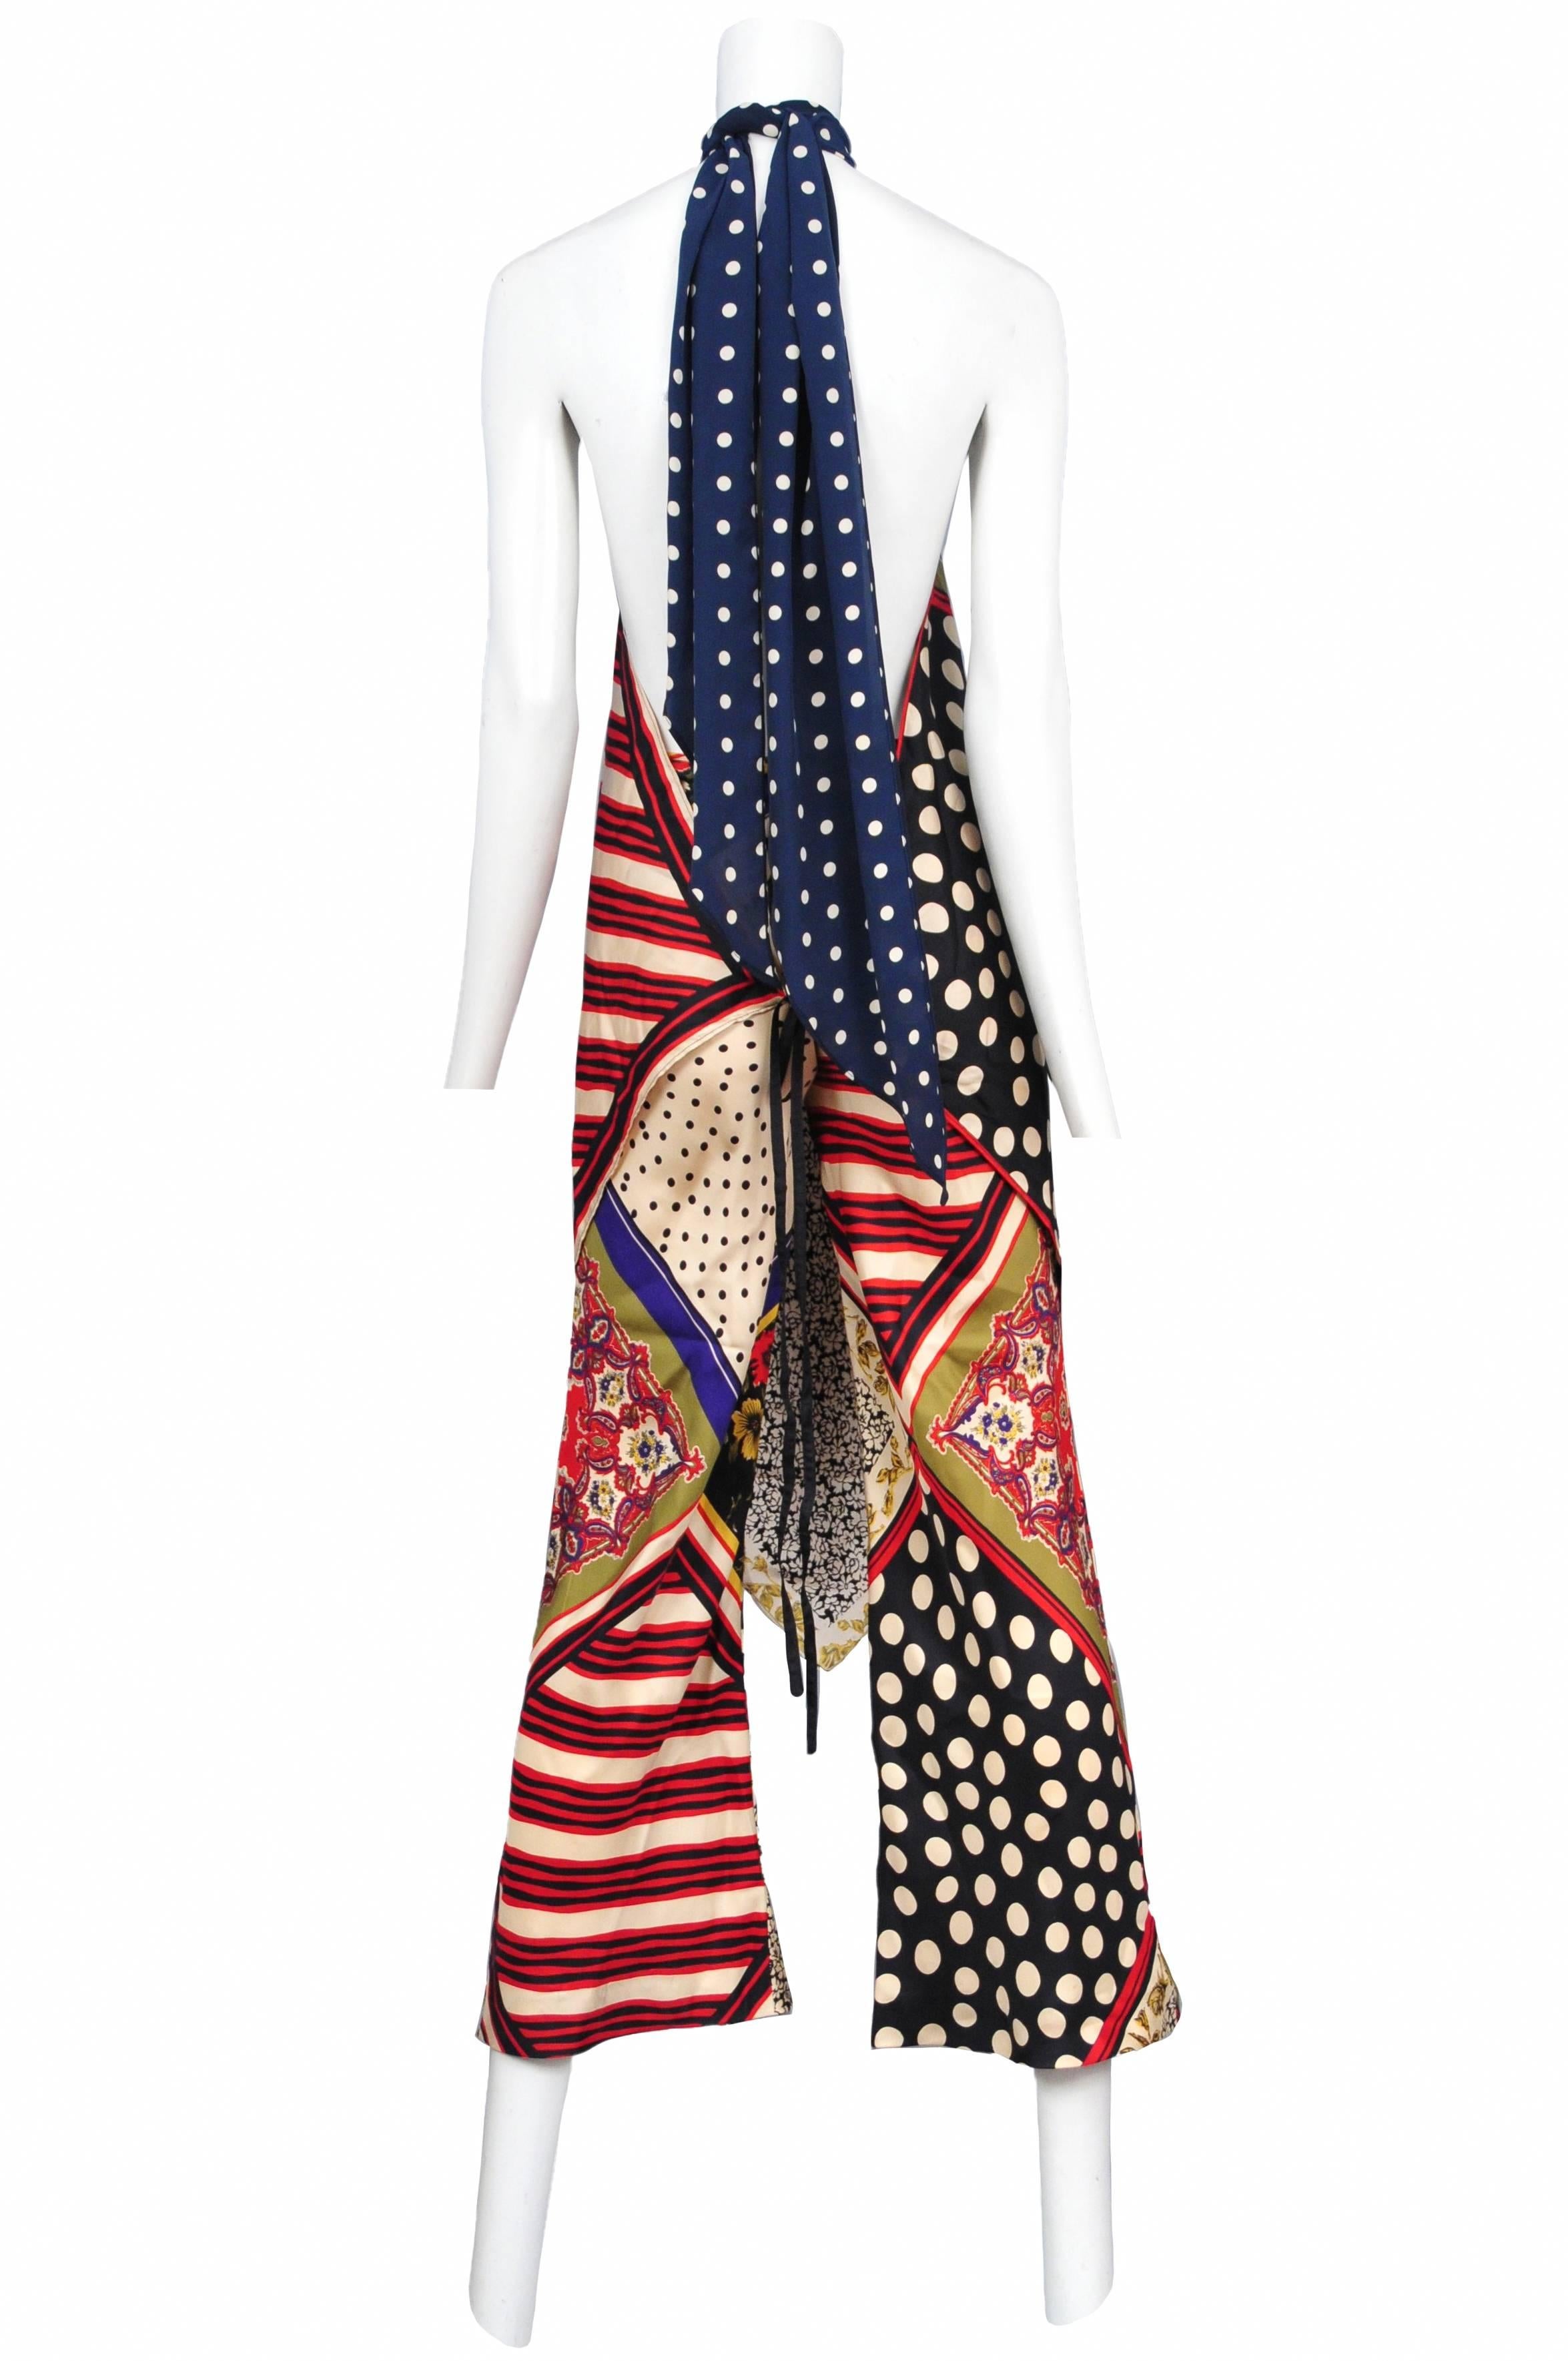 Vintage Jean Paul Gaultier multicolor scarf print ensemble featuring a halter style open back, tunic top featuring a scarf tie closure at the back neck and a pointed scarf shaped hem. The ensemble comes with matching printed pajama pants.